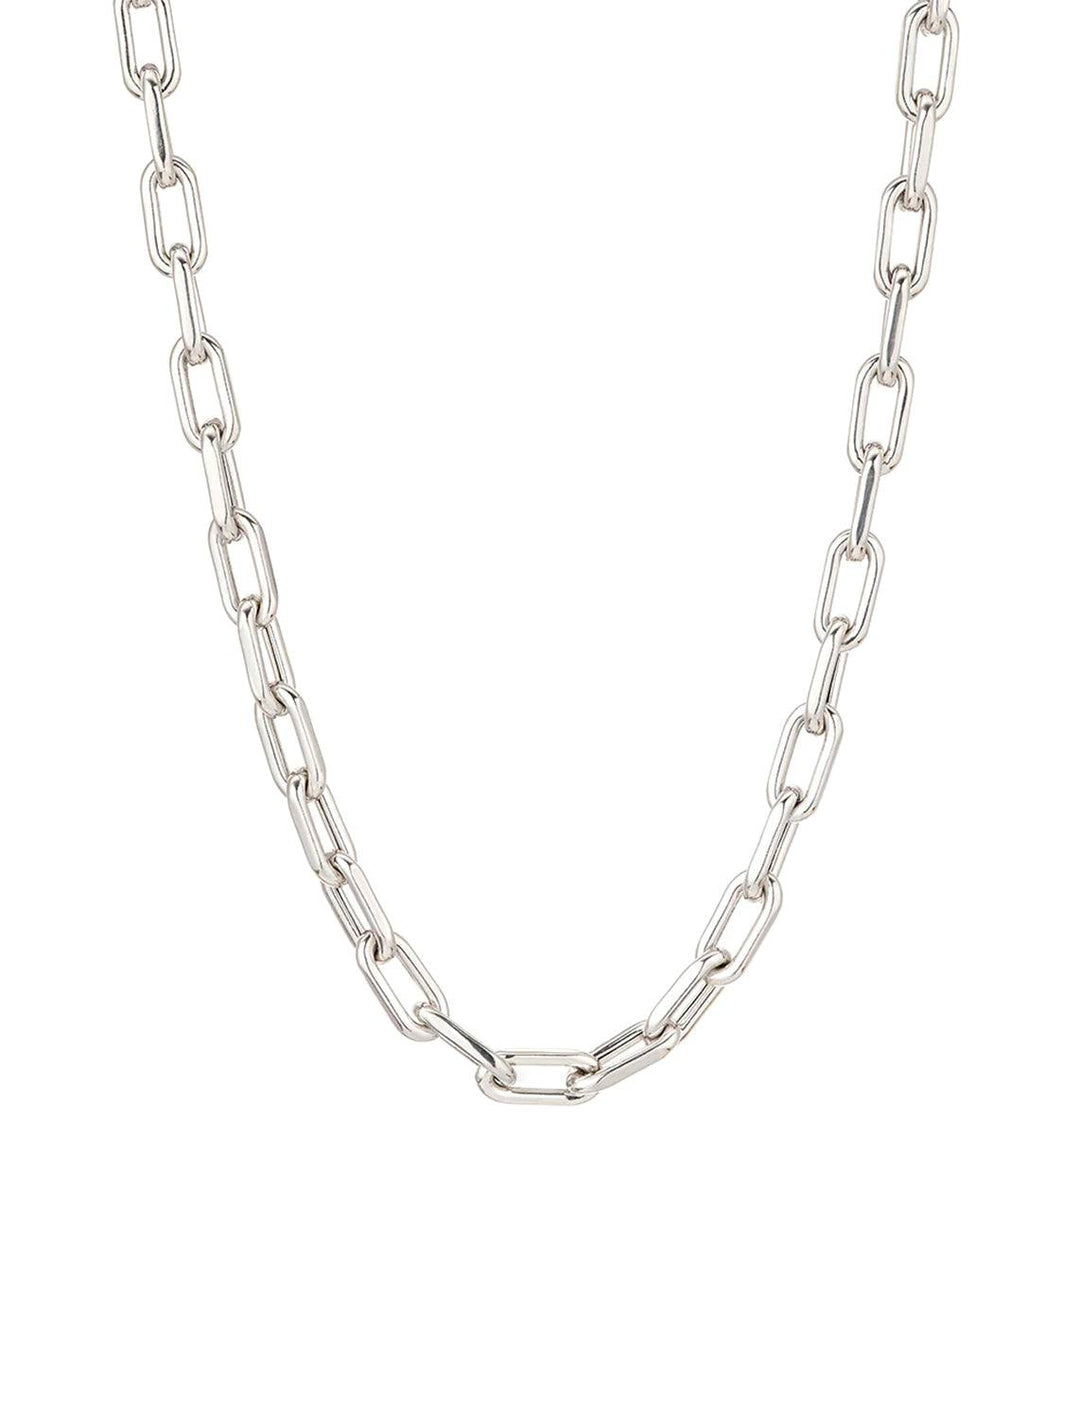 Front view of Adina Reyter's 5.3mm wide 16" Italian chain link necklace in silver.